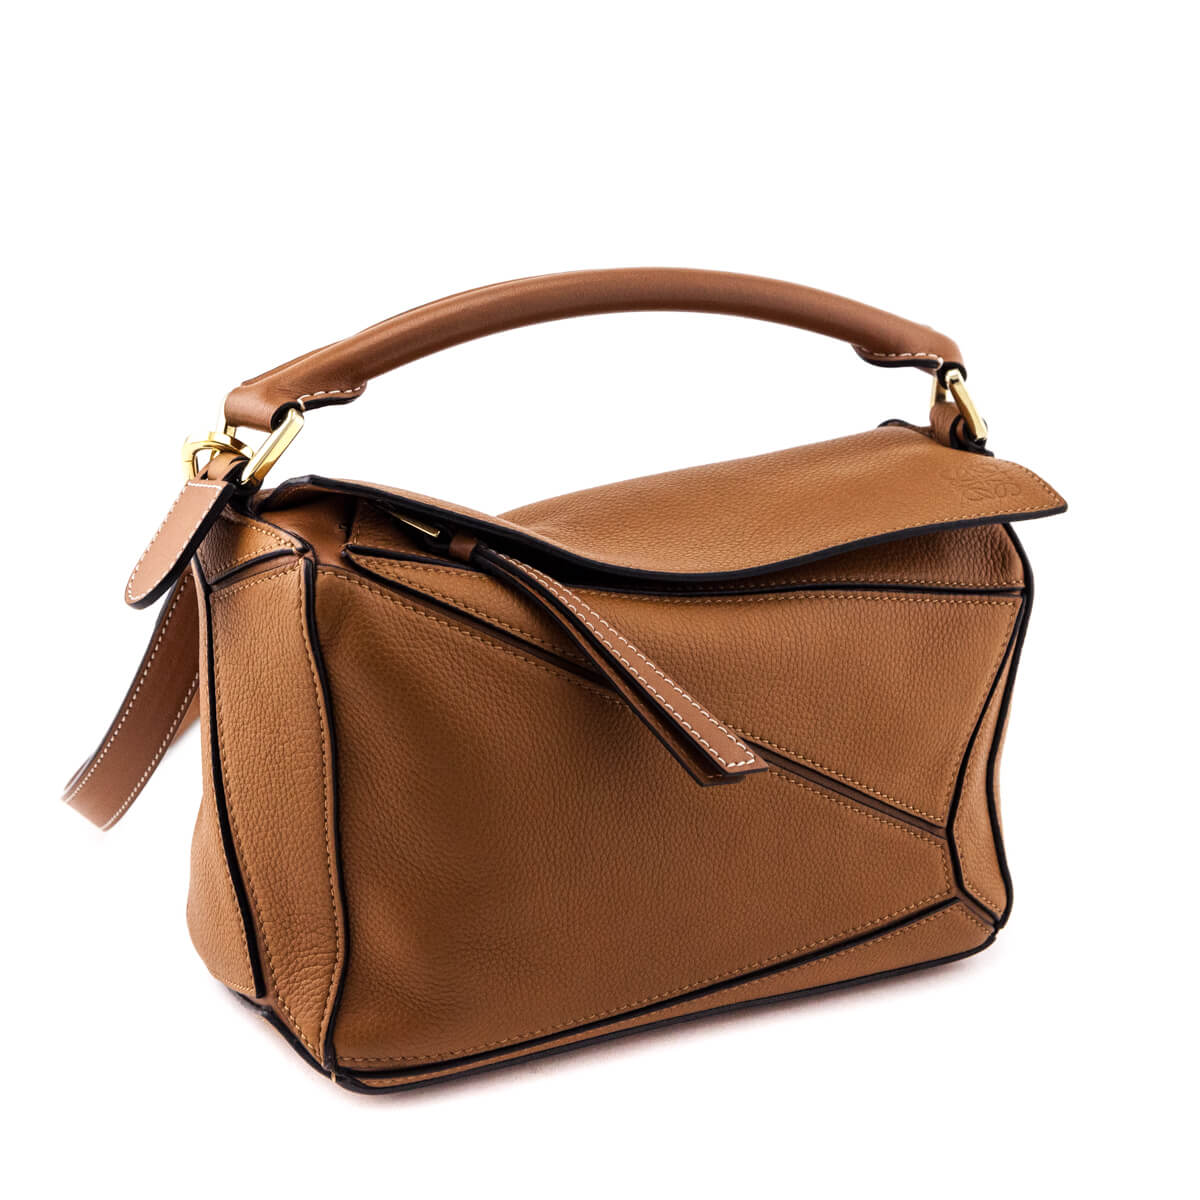 Loewe Tan Grained Calfskin Small Puzzle Bag - Love that Bag etc - Preowned Authentic Designer Handbags & Preloved Fashions